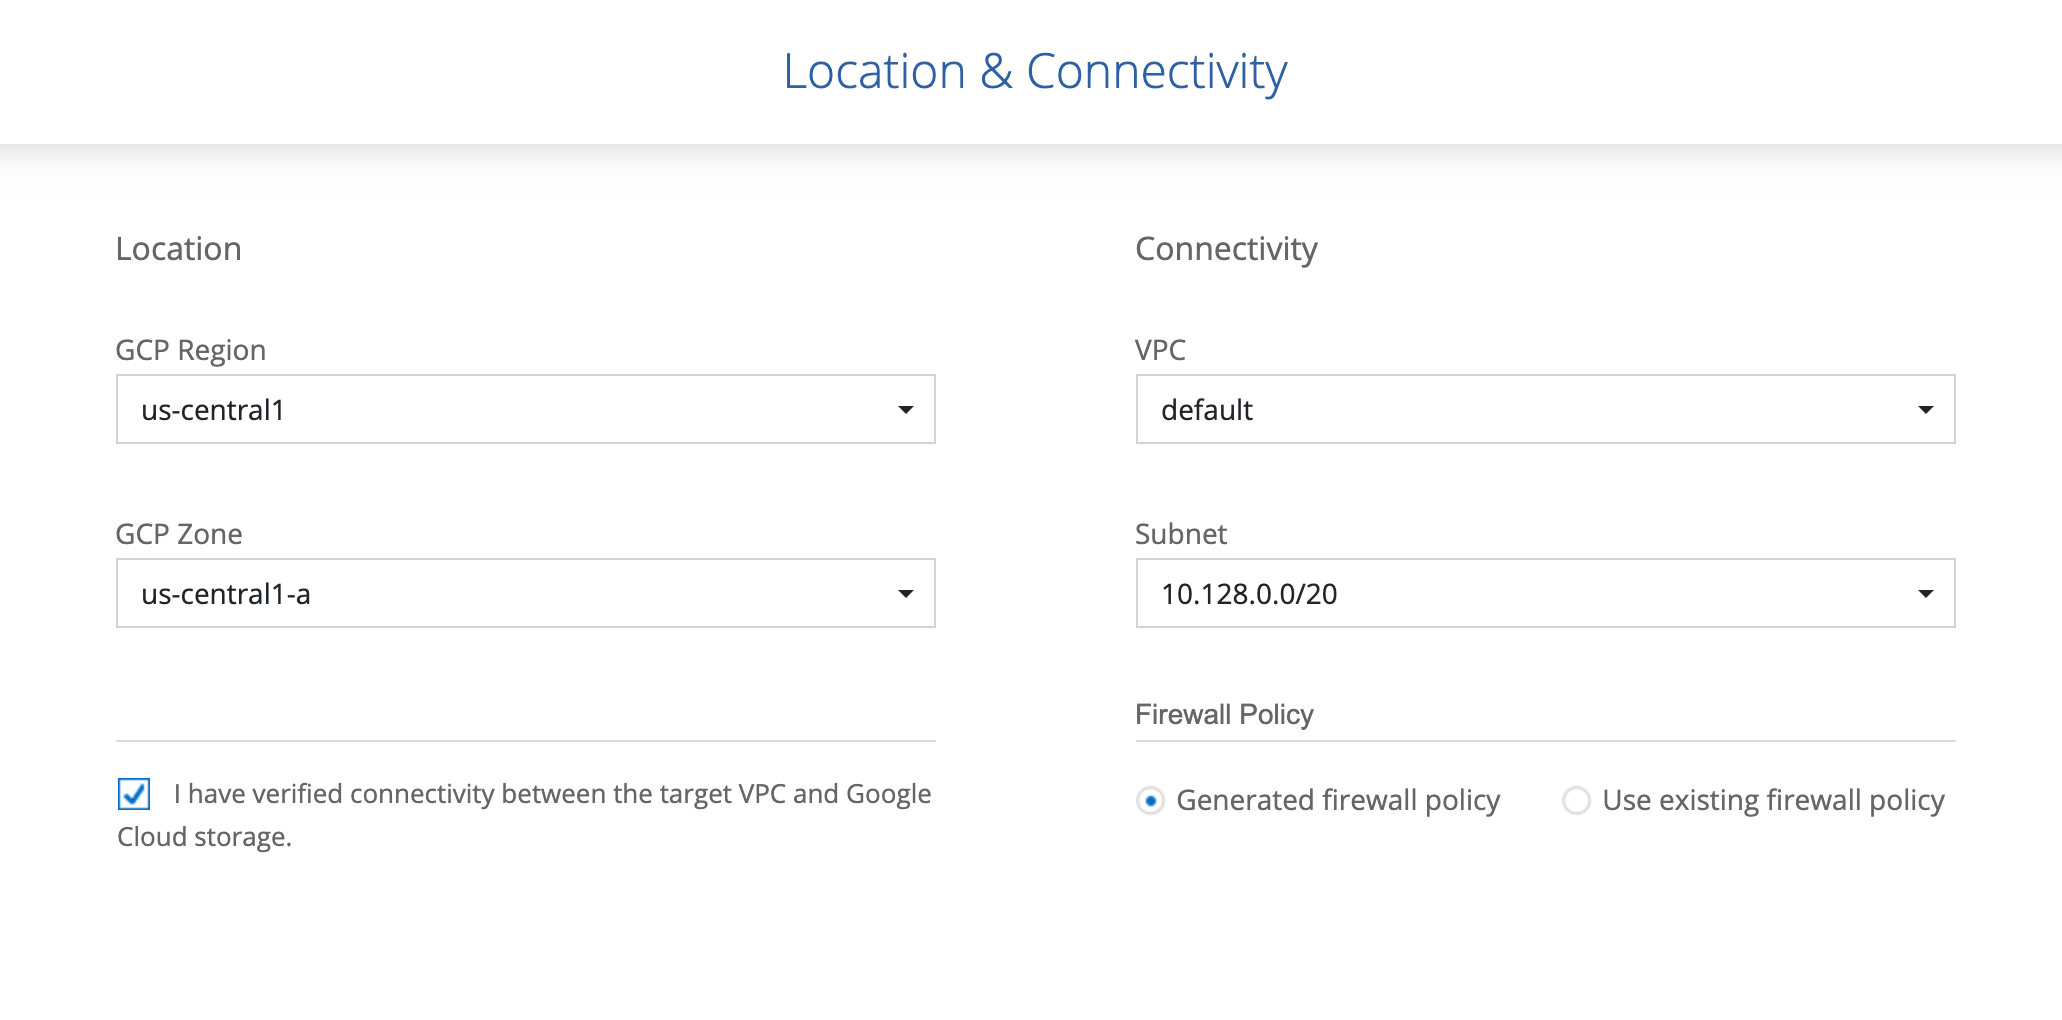 The Location and Connectivity page